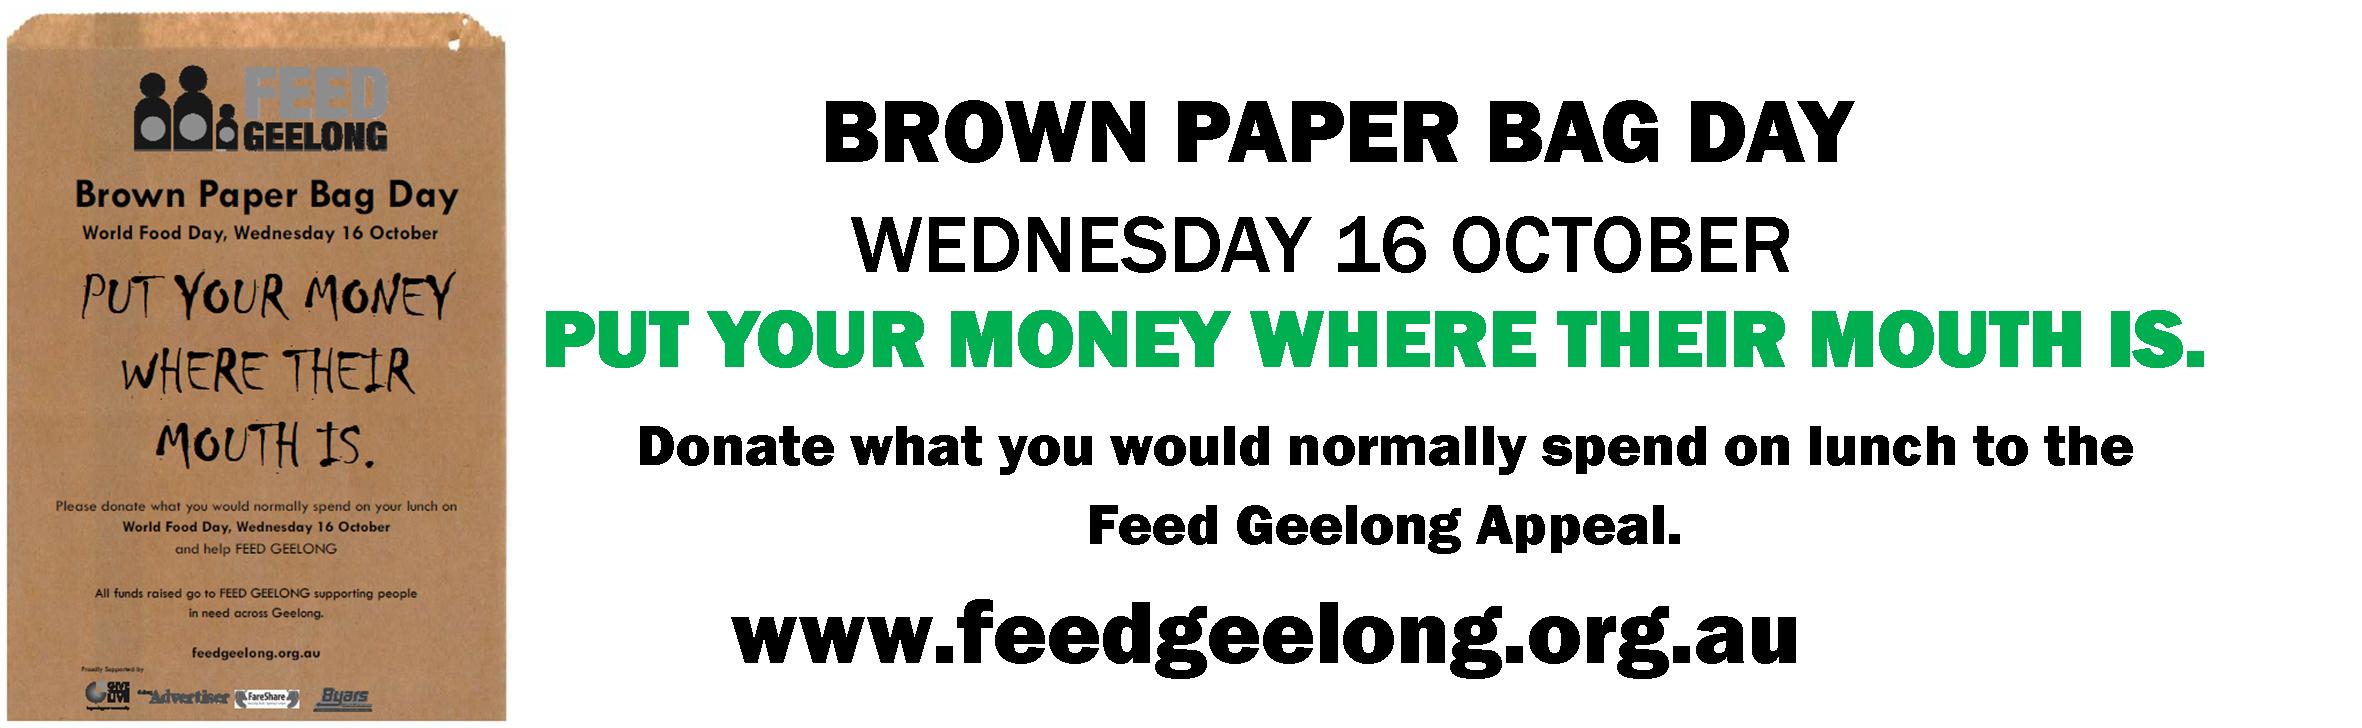 Prime Supports Brown Paper Bag Day – Wednesday 16th October